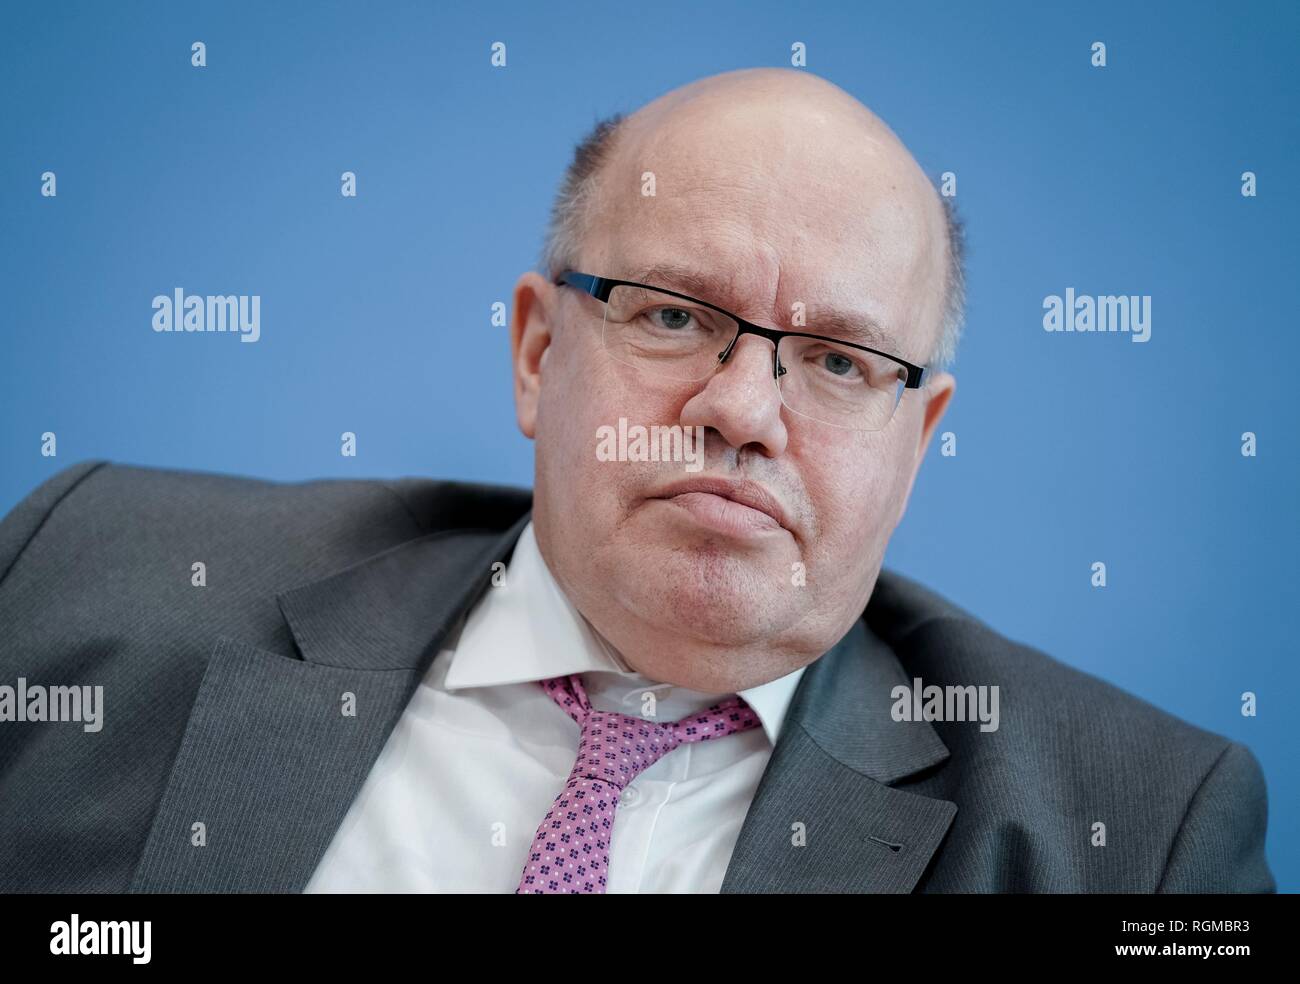 Berlin, Germany. 30th Jan, 2019. Peter Altmaier (CDU), Federal Minister of Economics and Energy, presents the Annual Economic Report 2019 at the Federal Press Conference. Credit: Kay Nietfeld/dpa/Alamy Live News Stock Photo